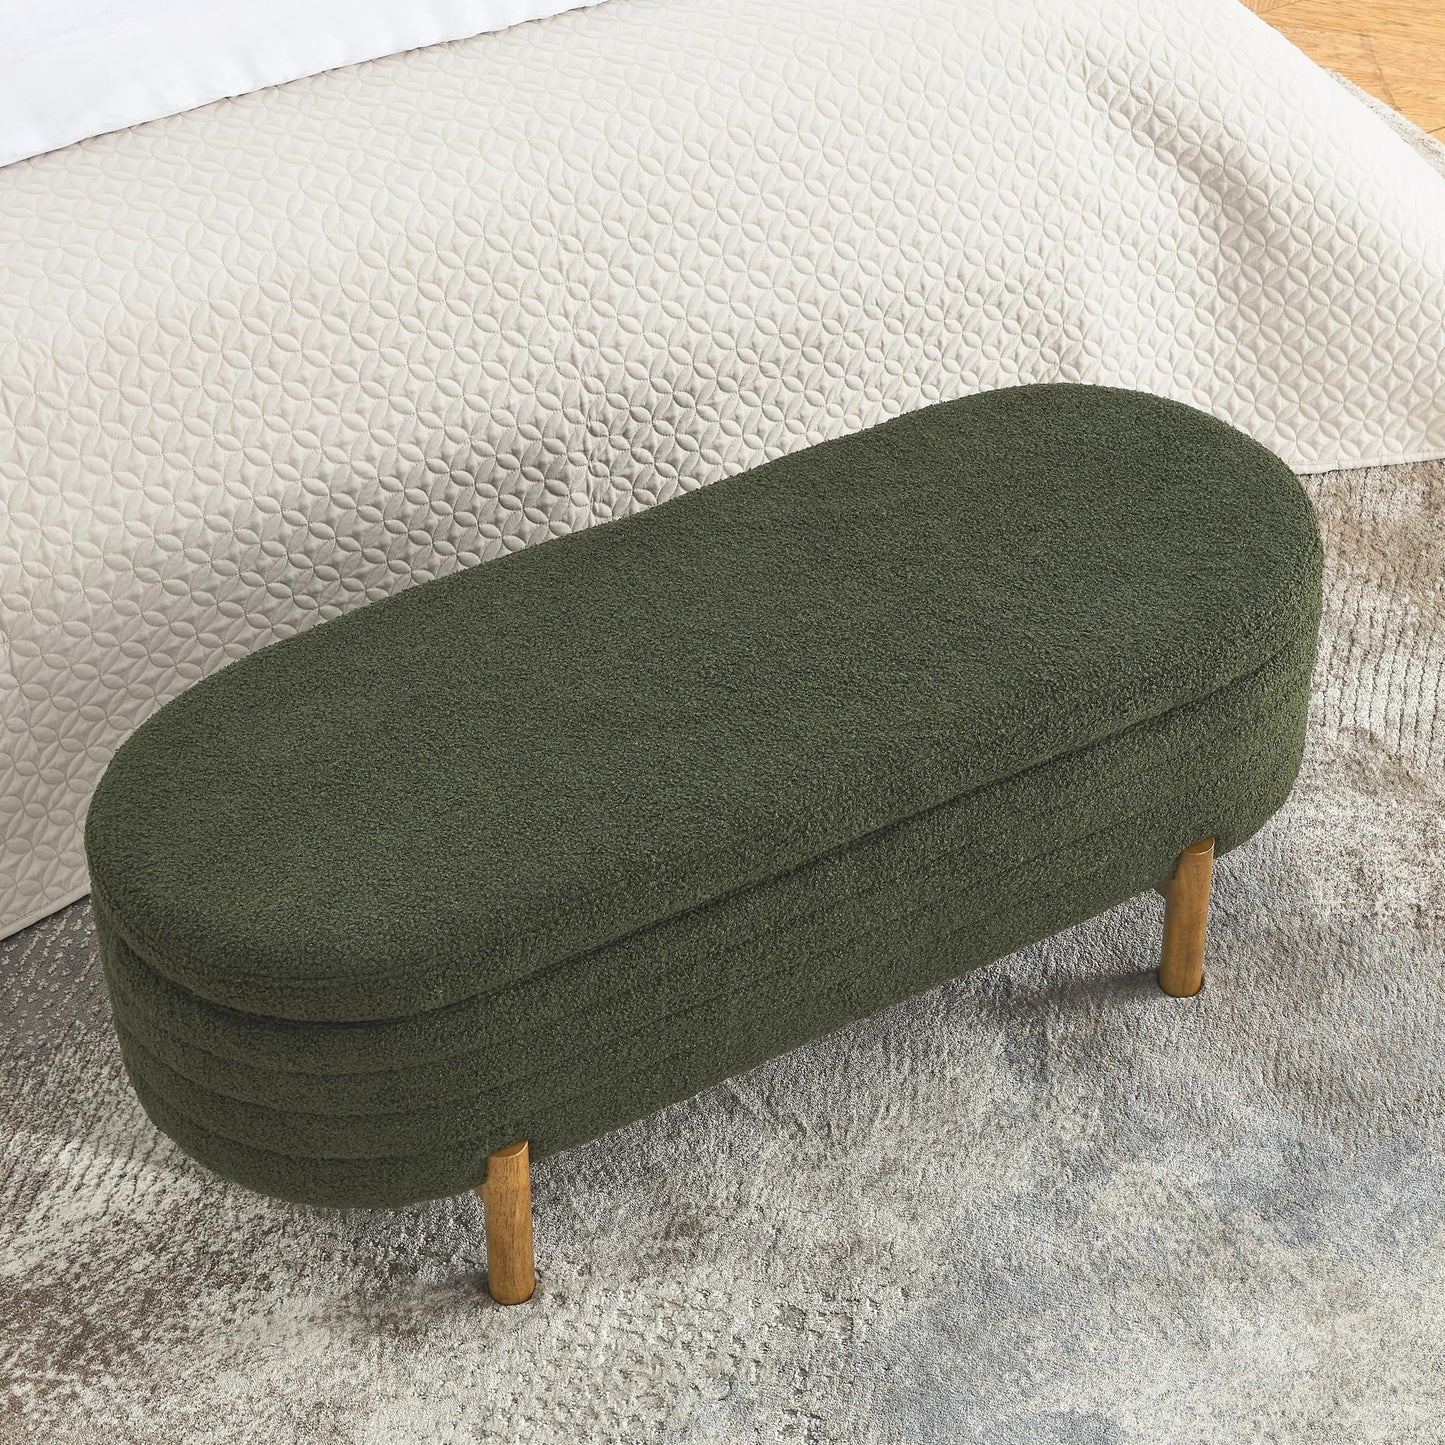 Niccae Teddy Velvet Oval Bedroom Storage Stool, Decorated and Soft Skin Friendly Teddy Fabric, Suitable for Entrance Benches, Living Rooms, Corridors, and Bed Ends (Green)